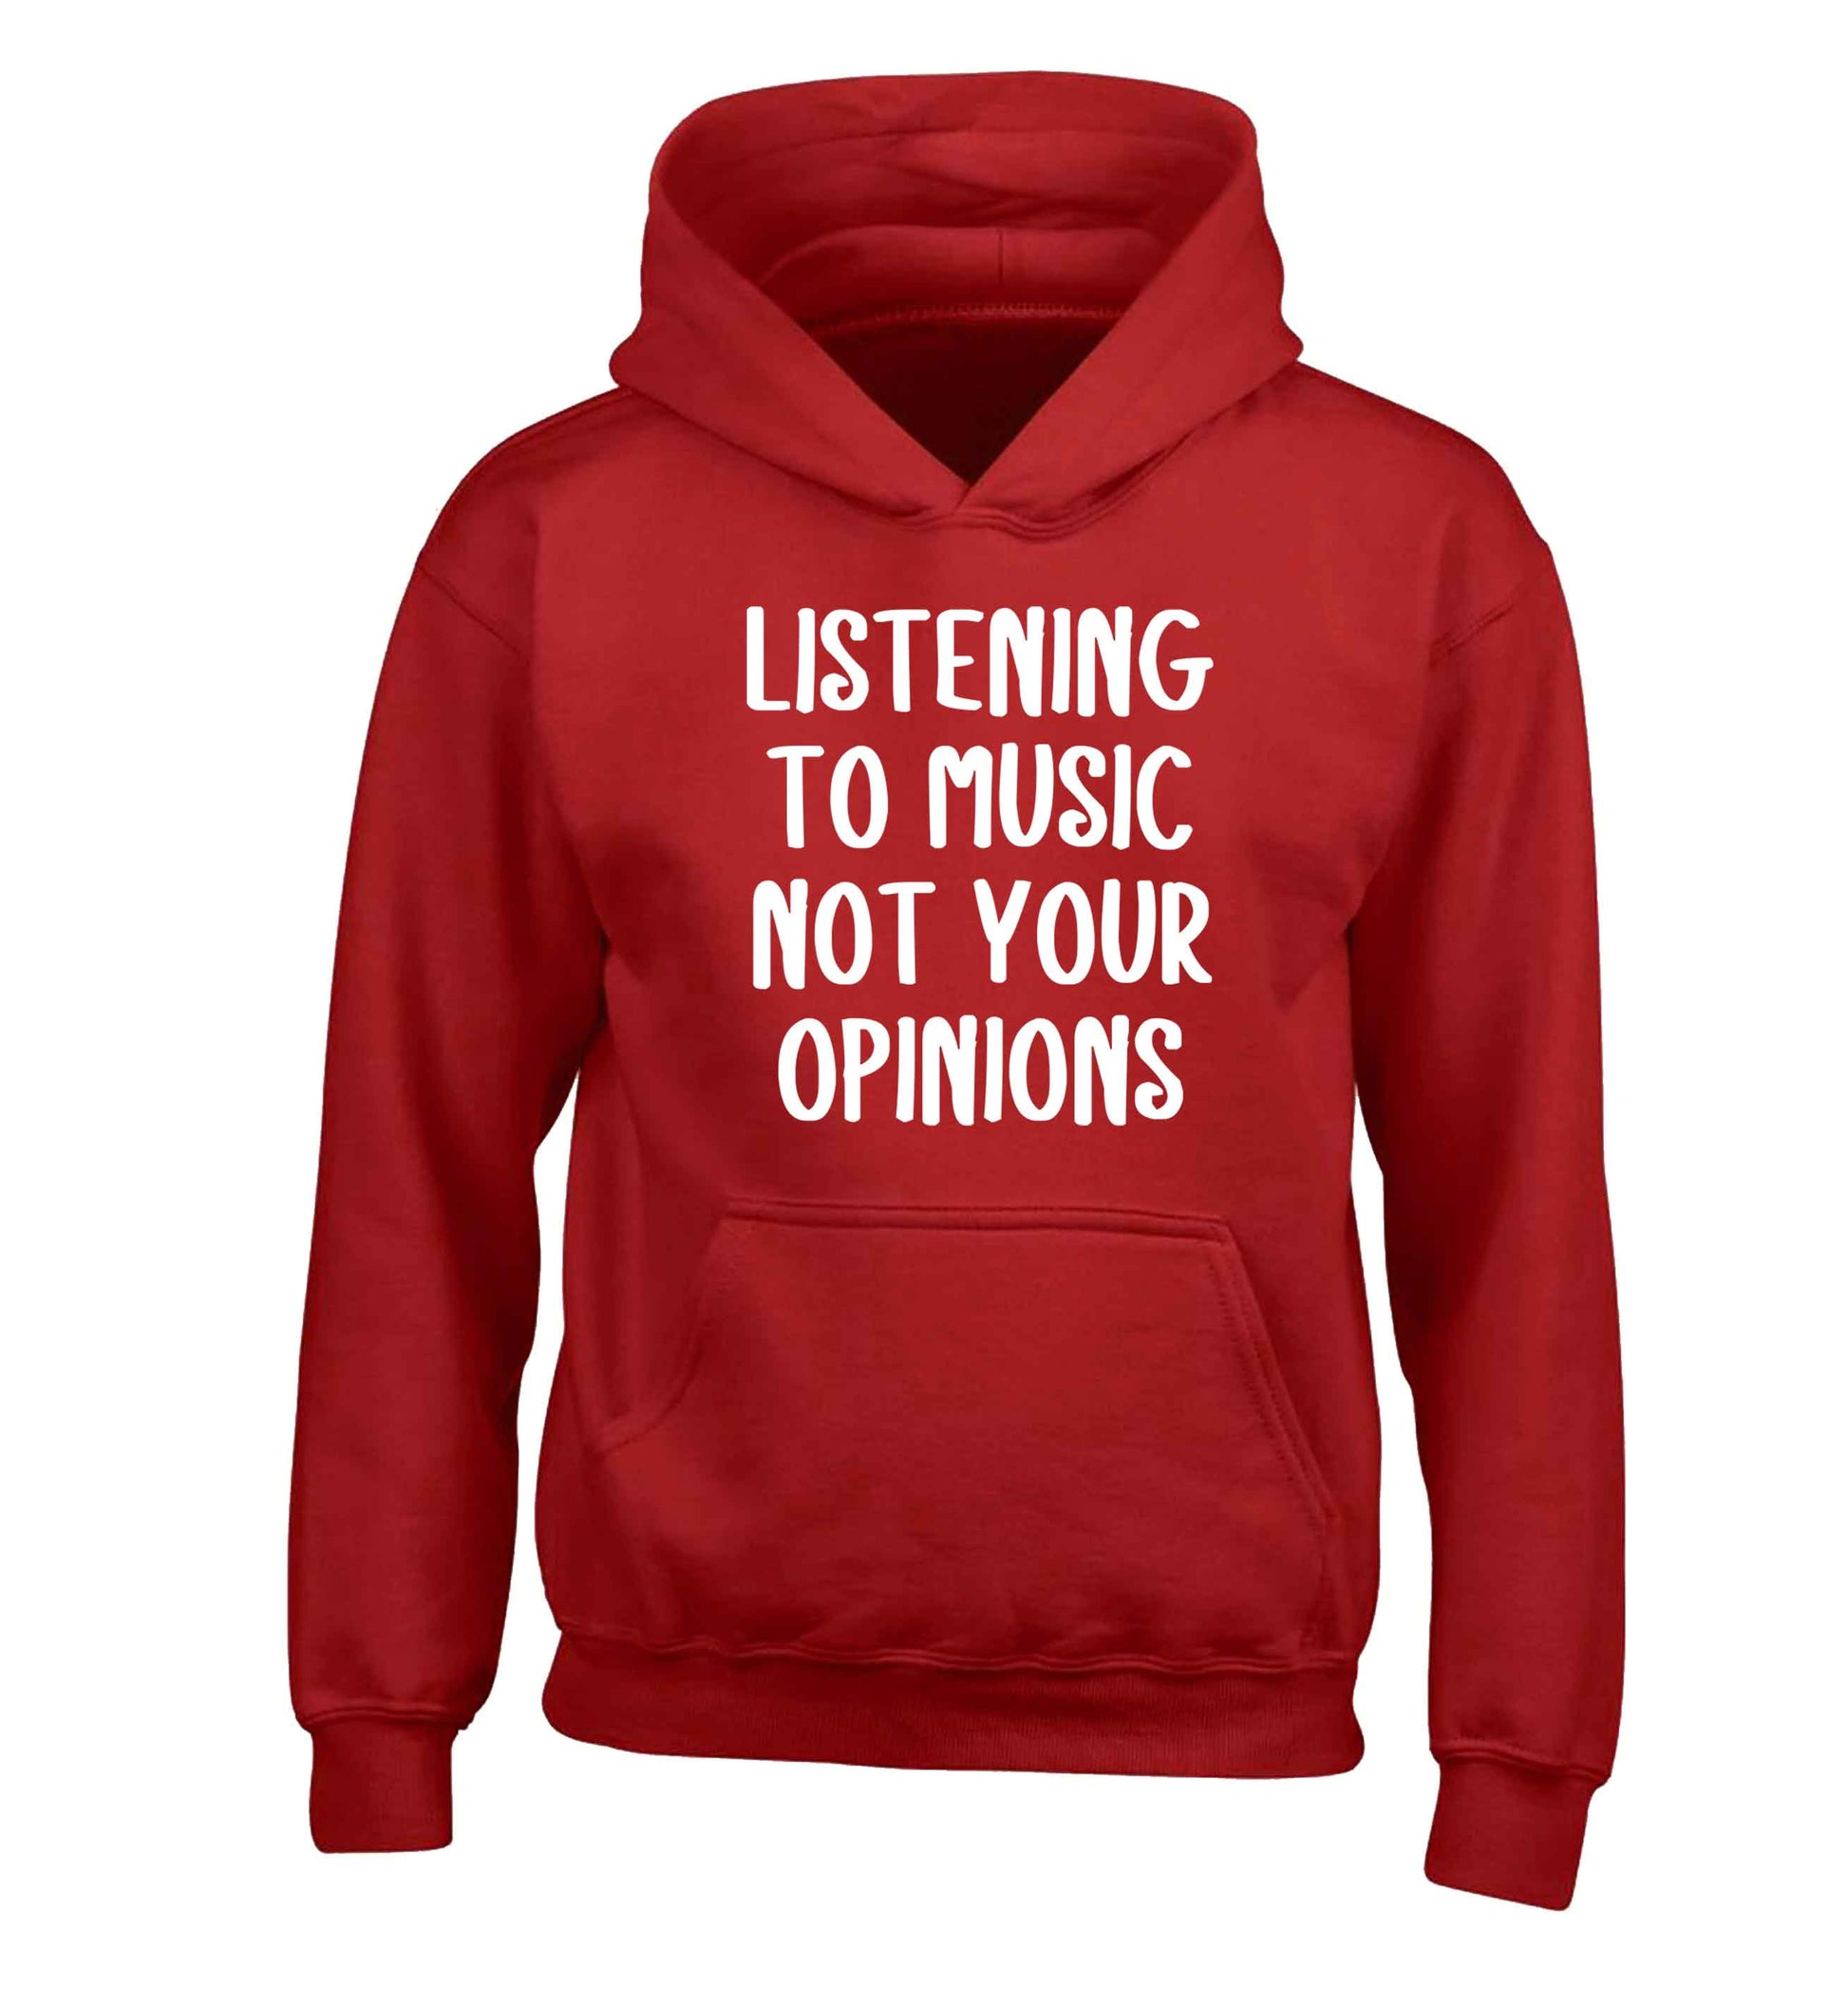 Listening to music not your opinions children's red hoodie 12-13 Years